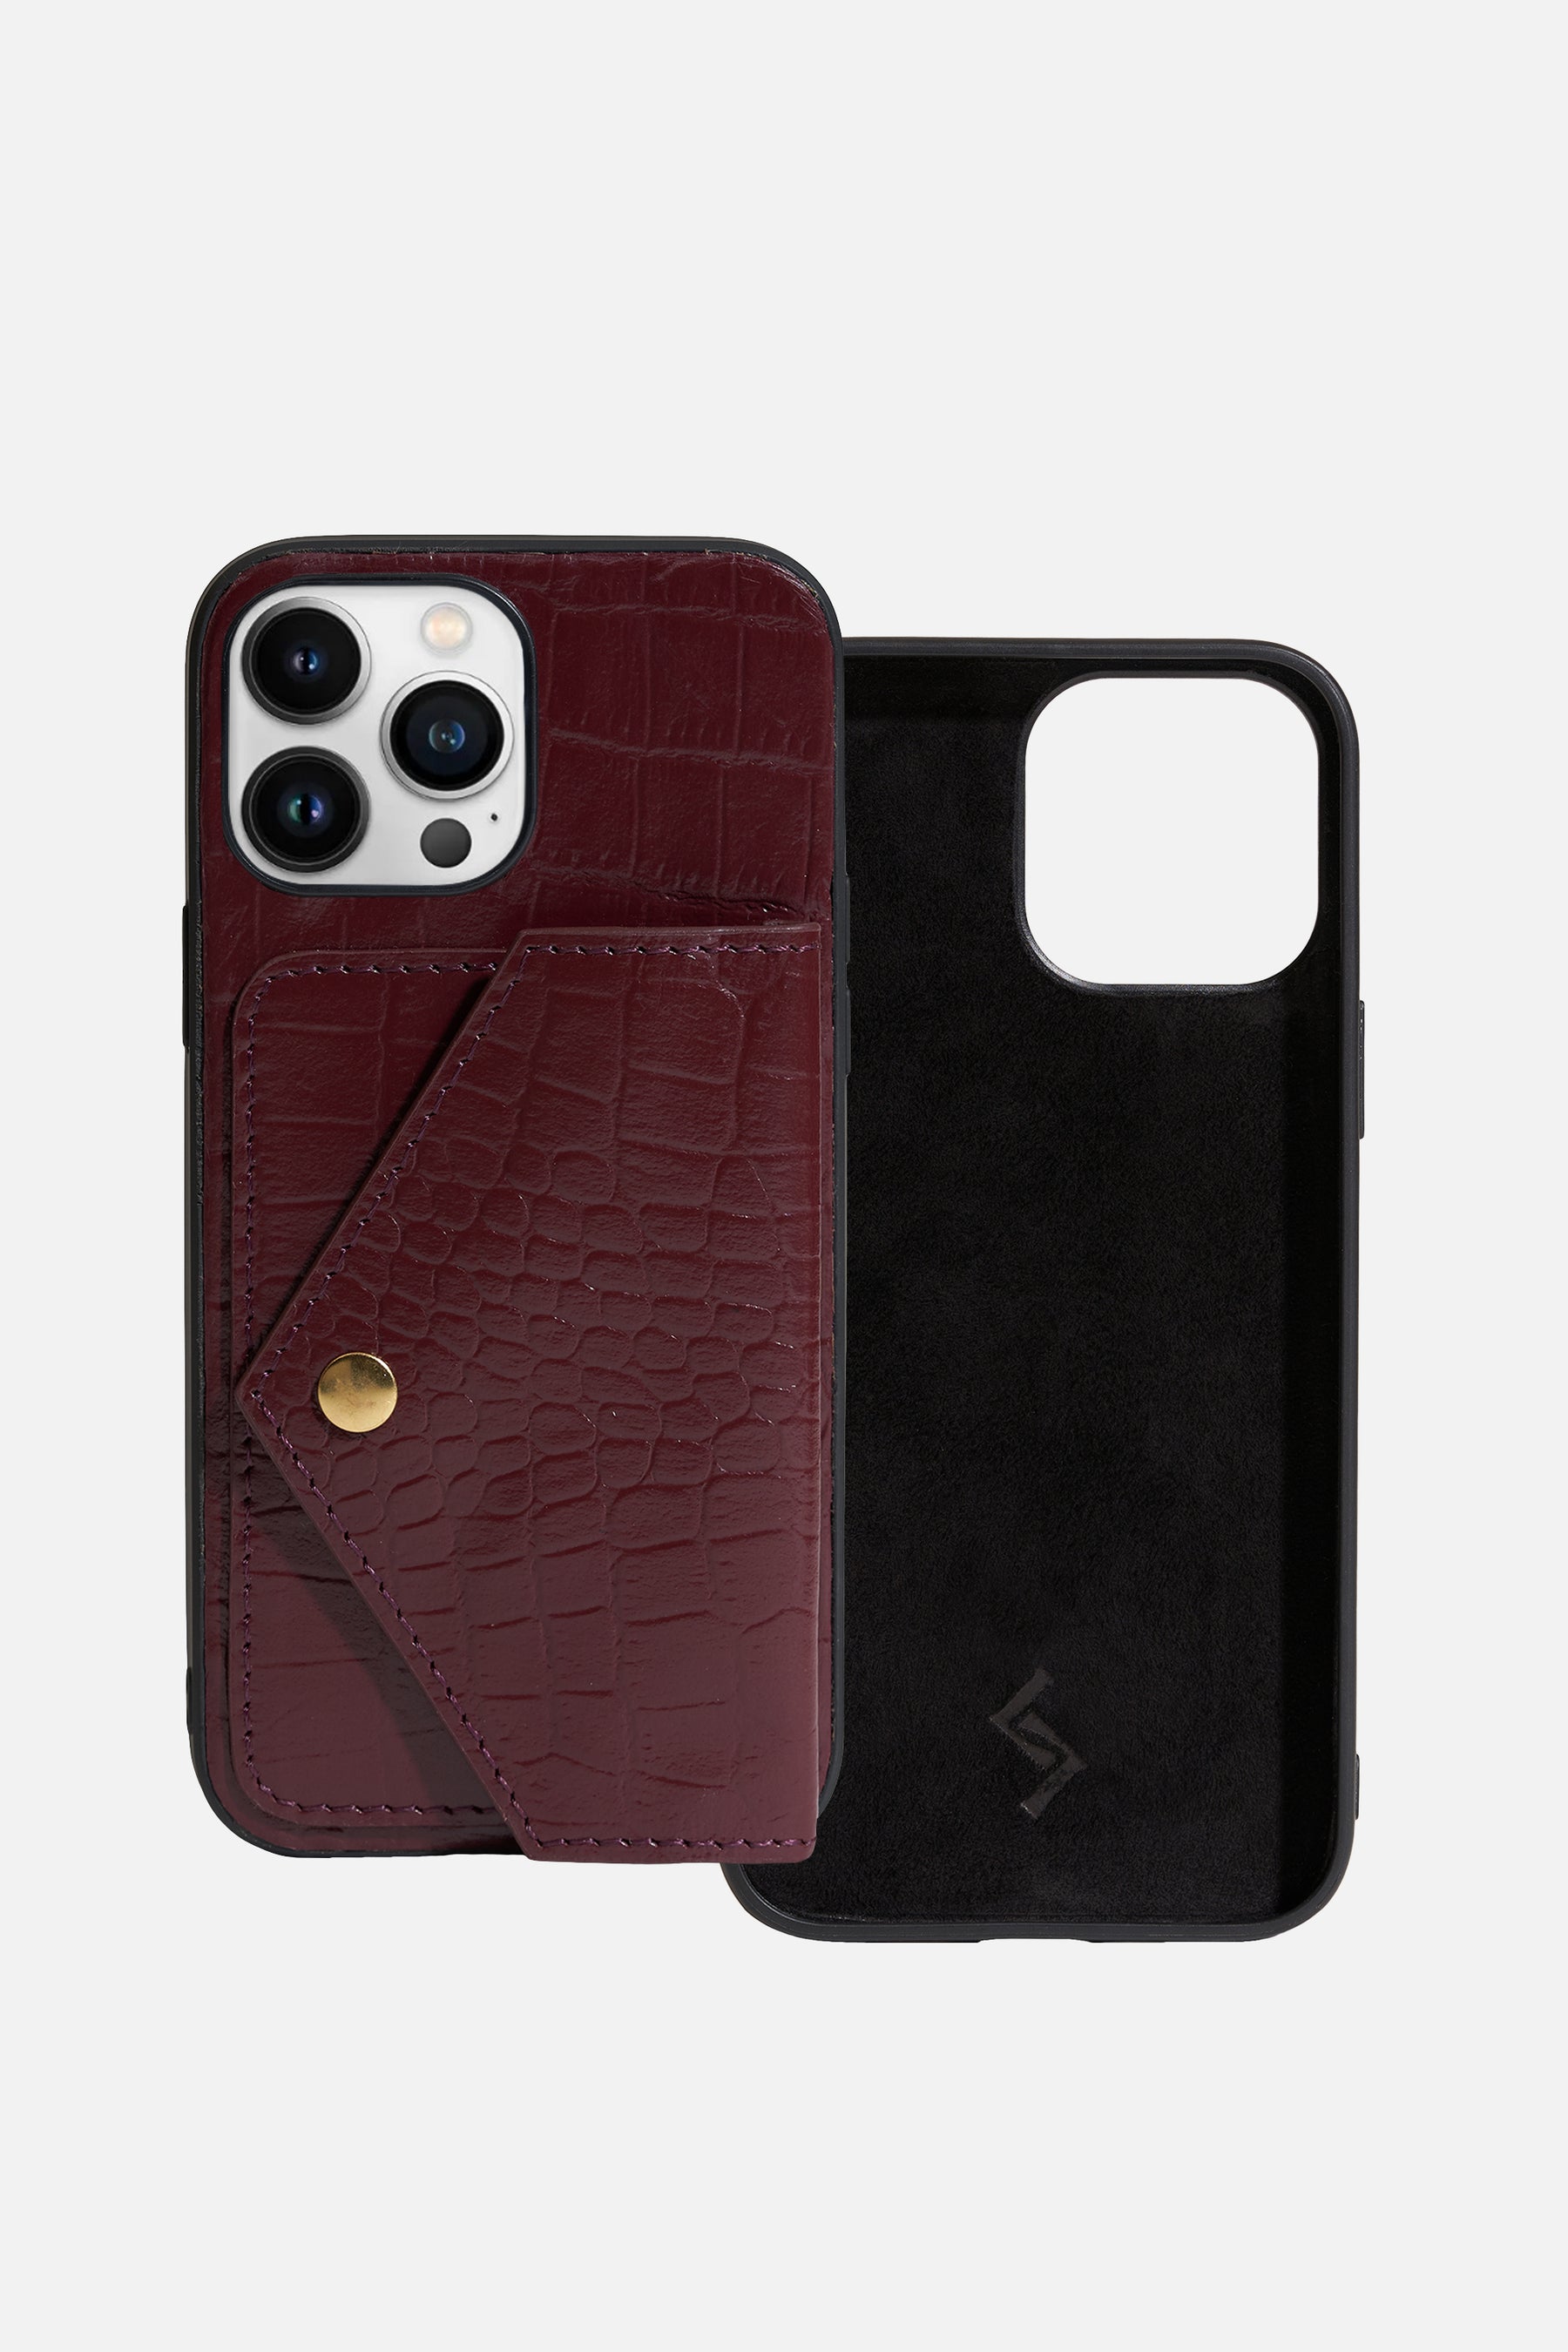 iPhone Case With Flap Pocket - Croco Wine